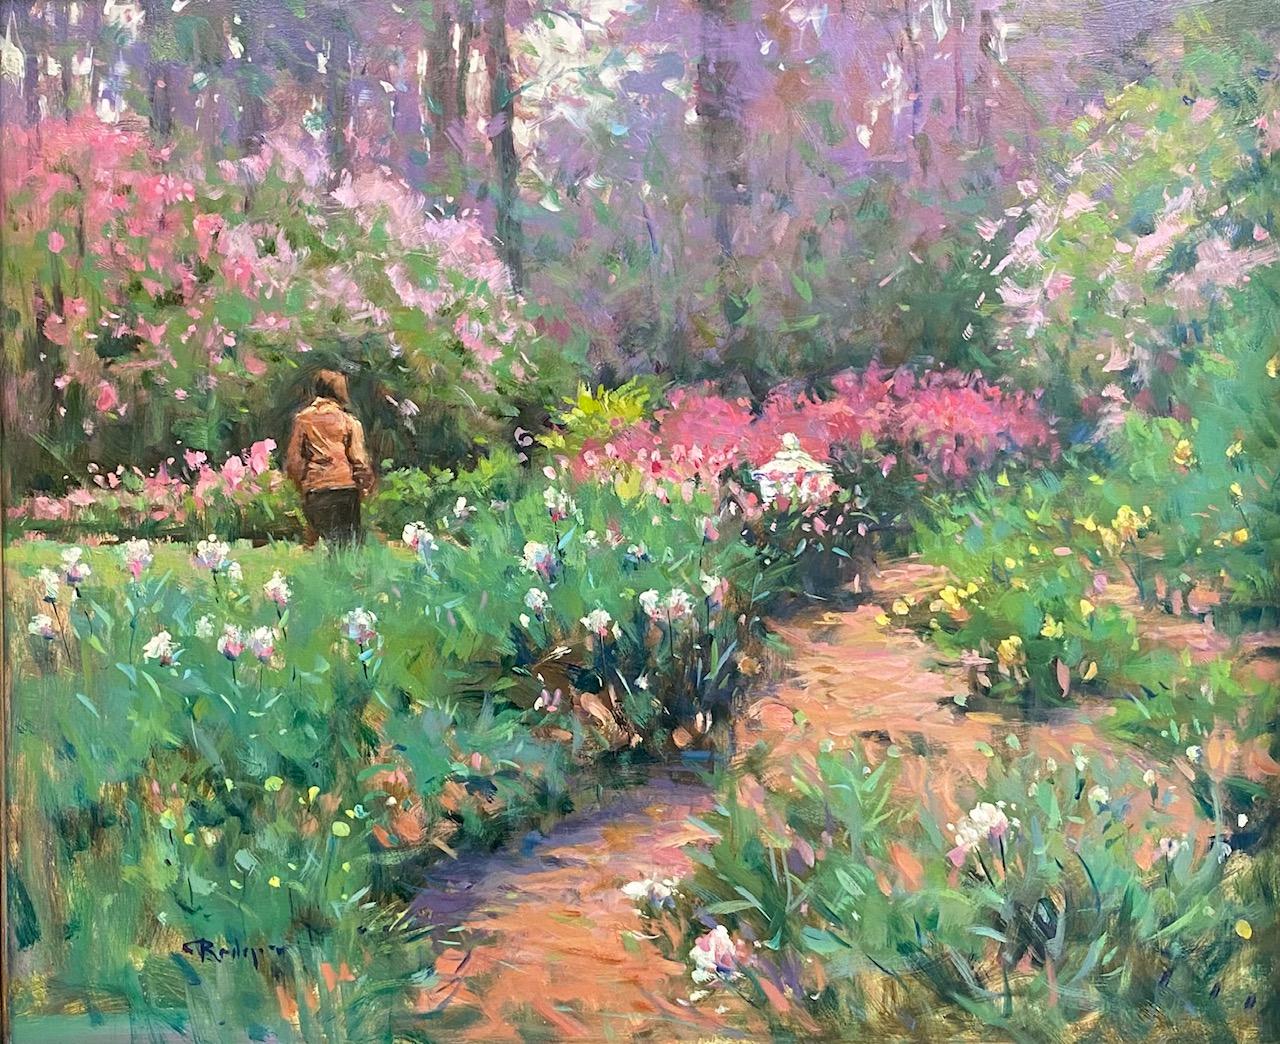 Forest at Winterthur Garden, original 20x24 impressionist floral landscape - Painting by Jim Rodgers